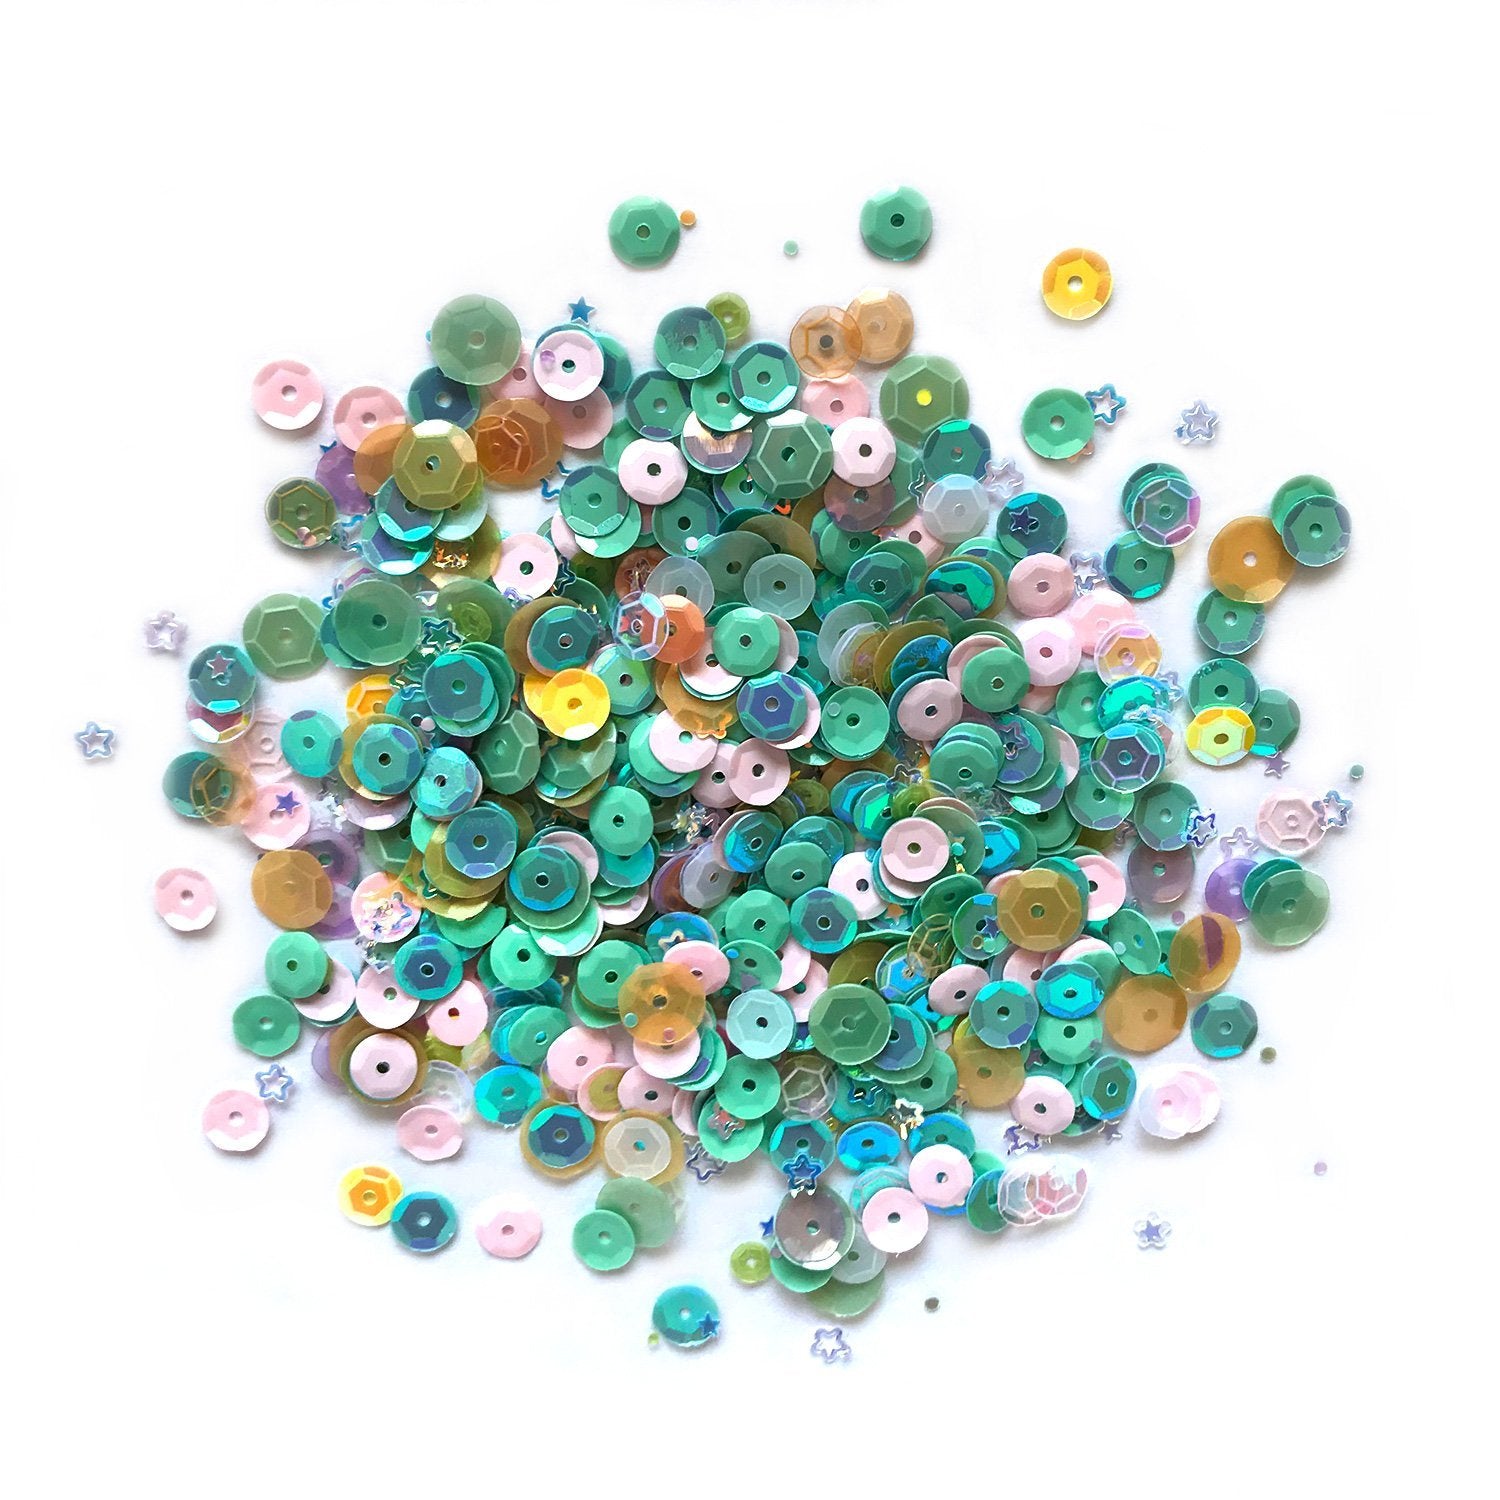  20mm Sequins Large Hole Random Mix Knitting Sewing Paillettes  Made in USA